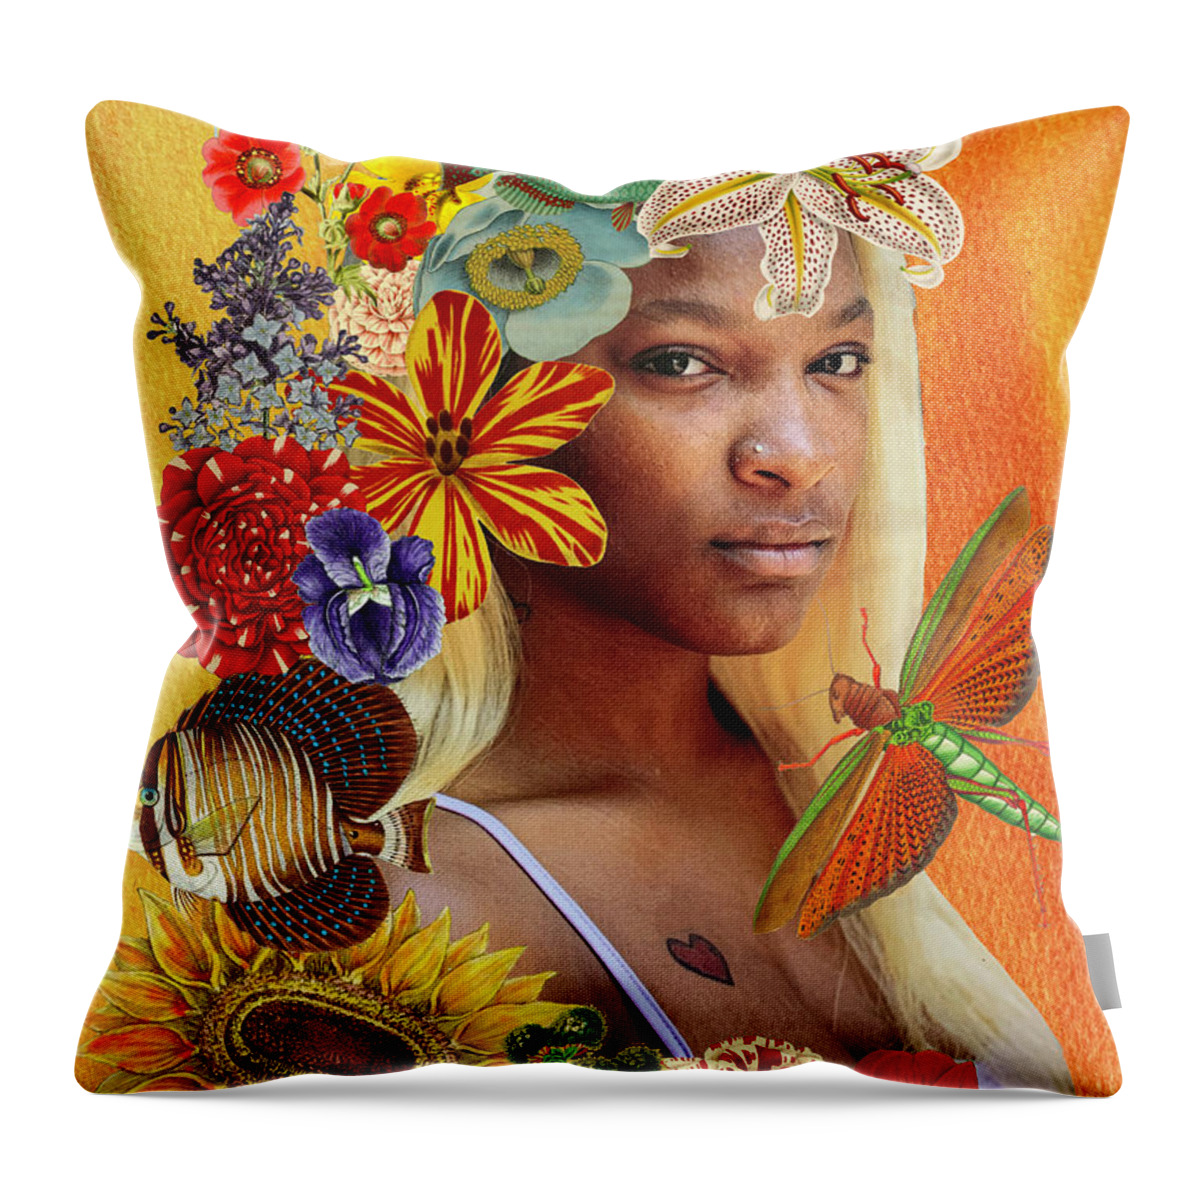 Vintage Flowers Throw Pillow featuring the mixed media Soul of a child by Lorena Cassady